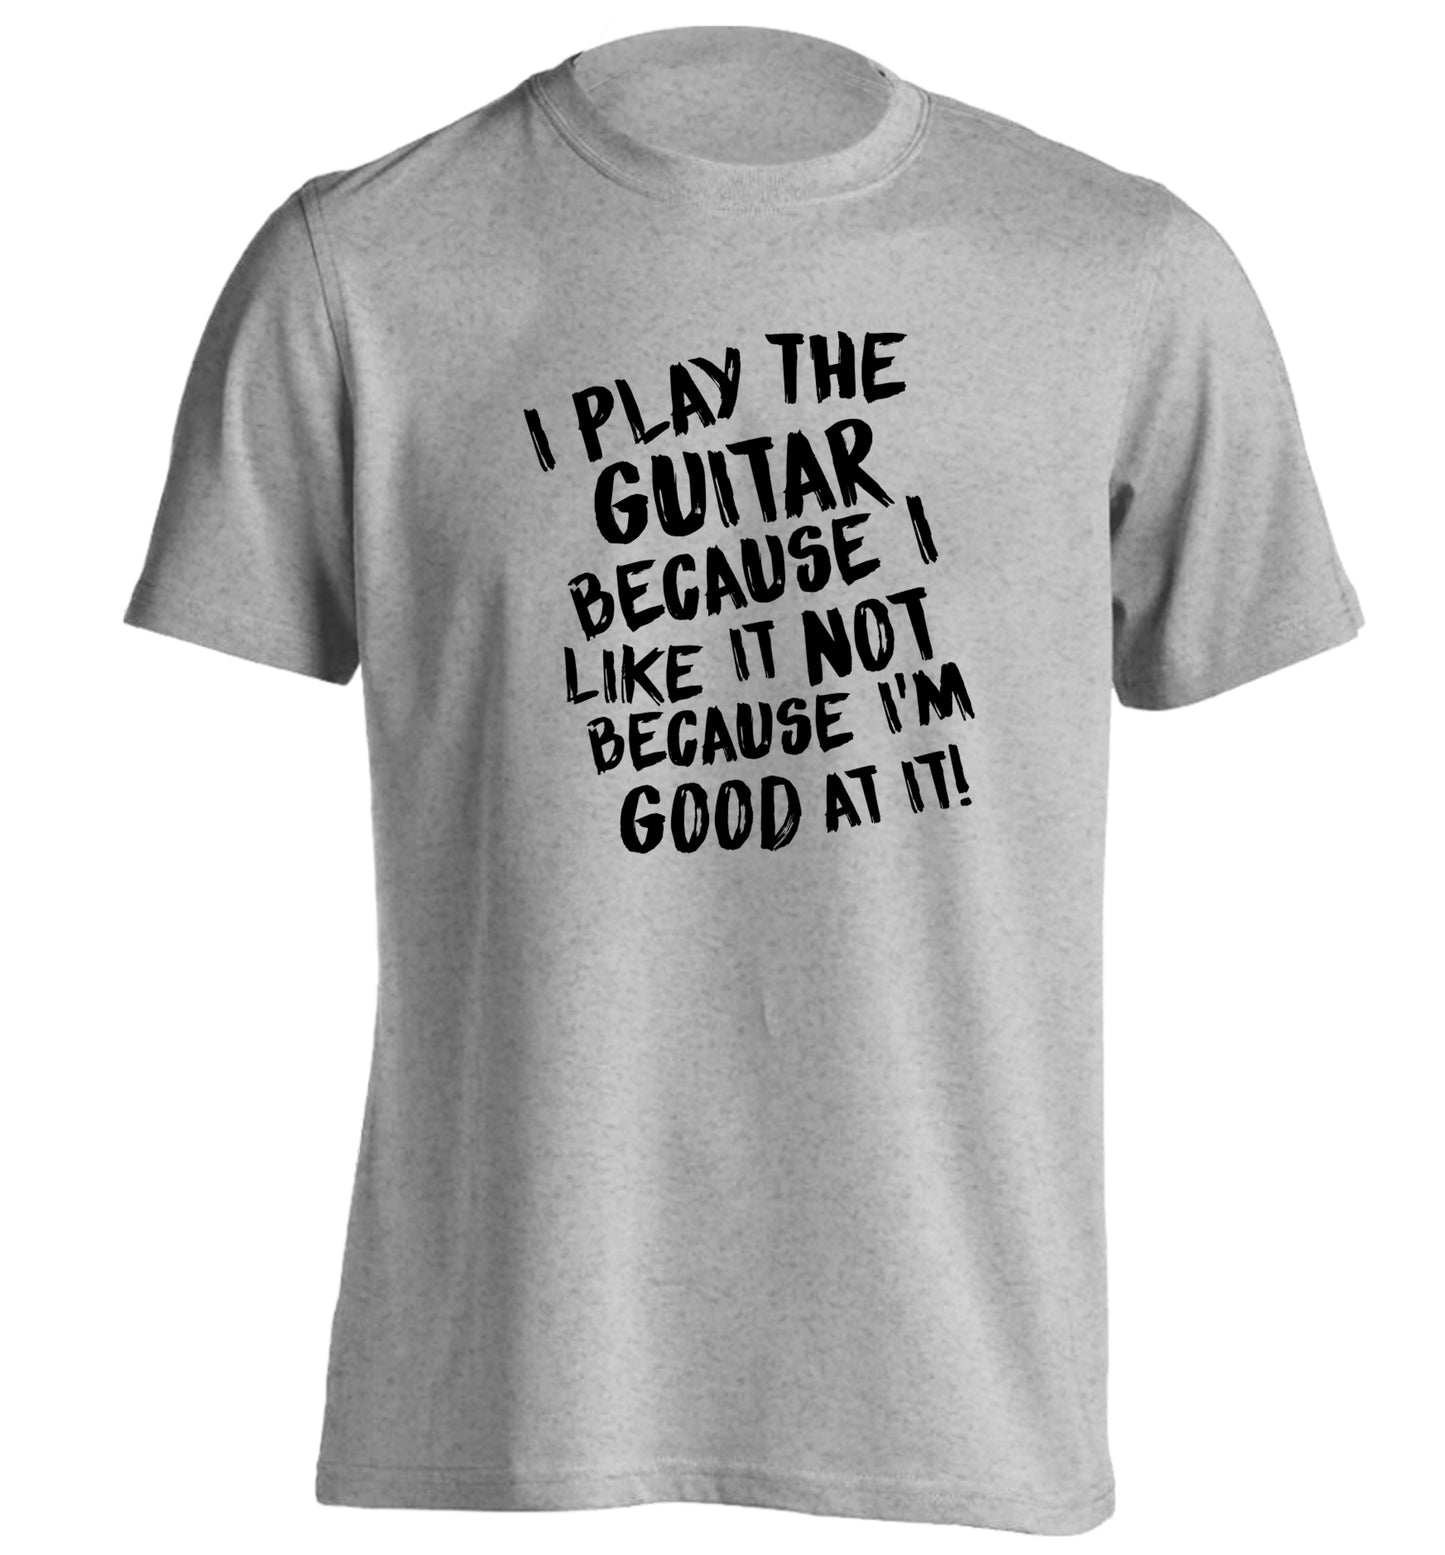 I play the guitar because I like it not because I'm good at it adults unisex grey Tshirt 2XL